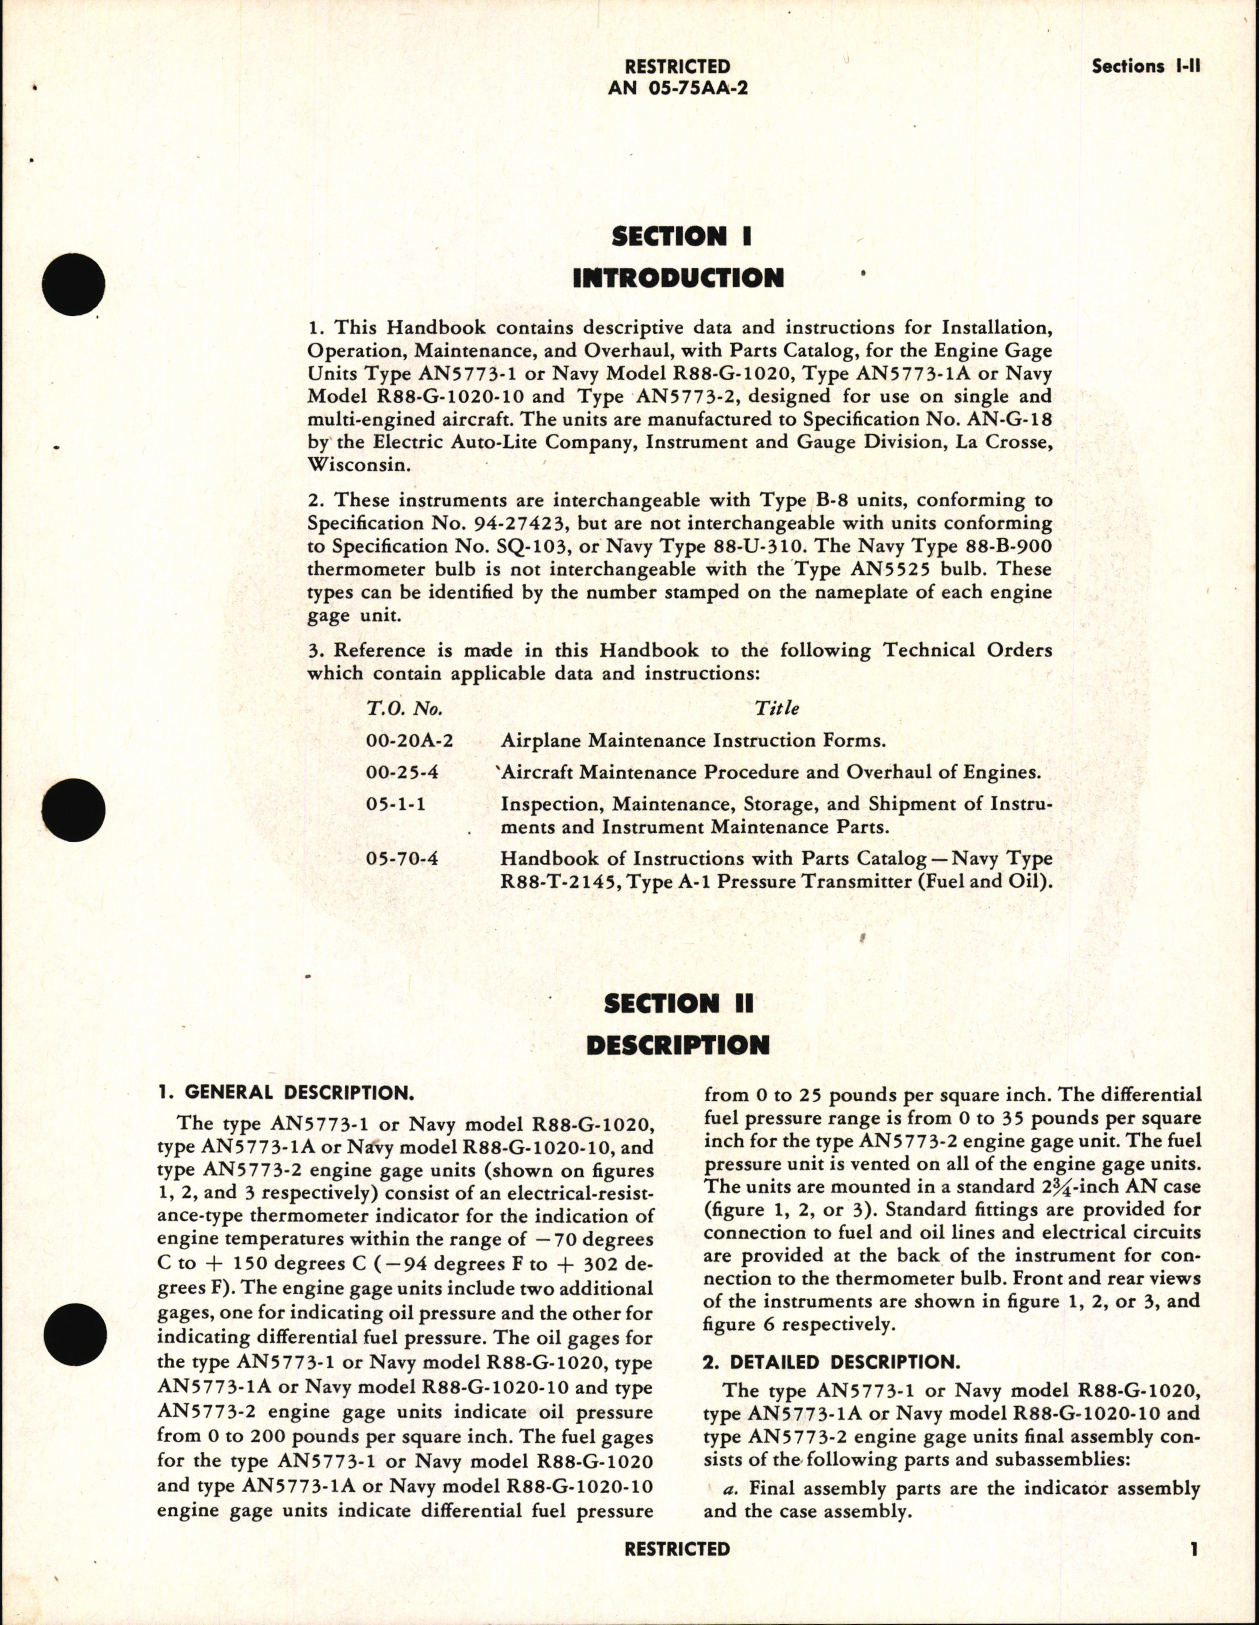 Sample page 7 from AirCorps Library document: Operation, Service, & Overhaul Instructions with Parts Catalog for Engine Gage Unit